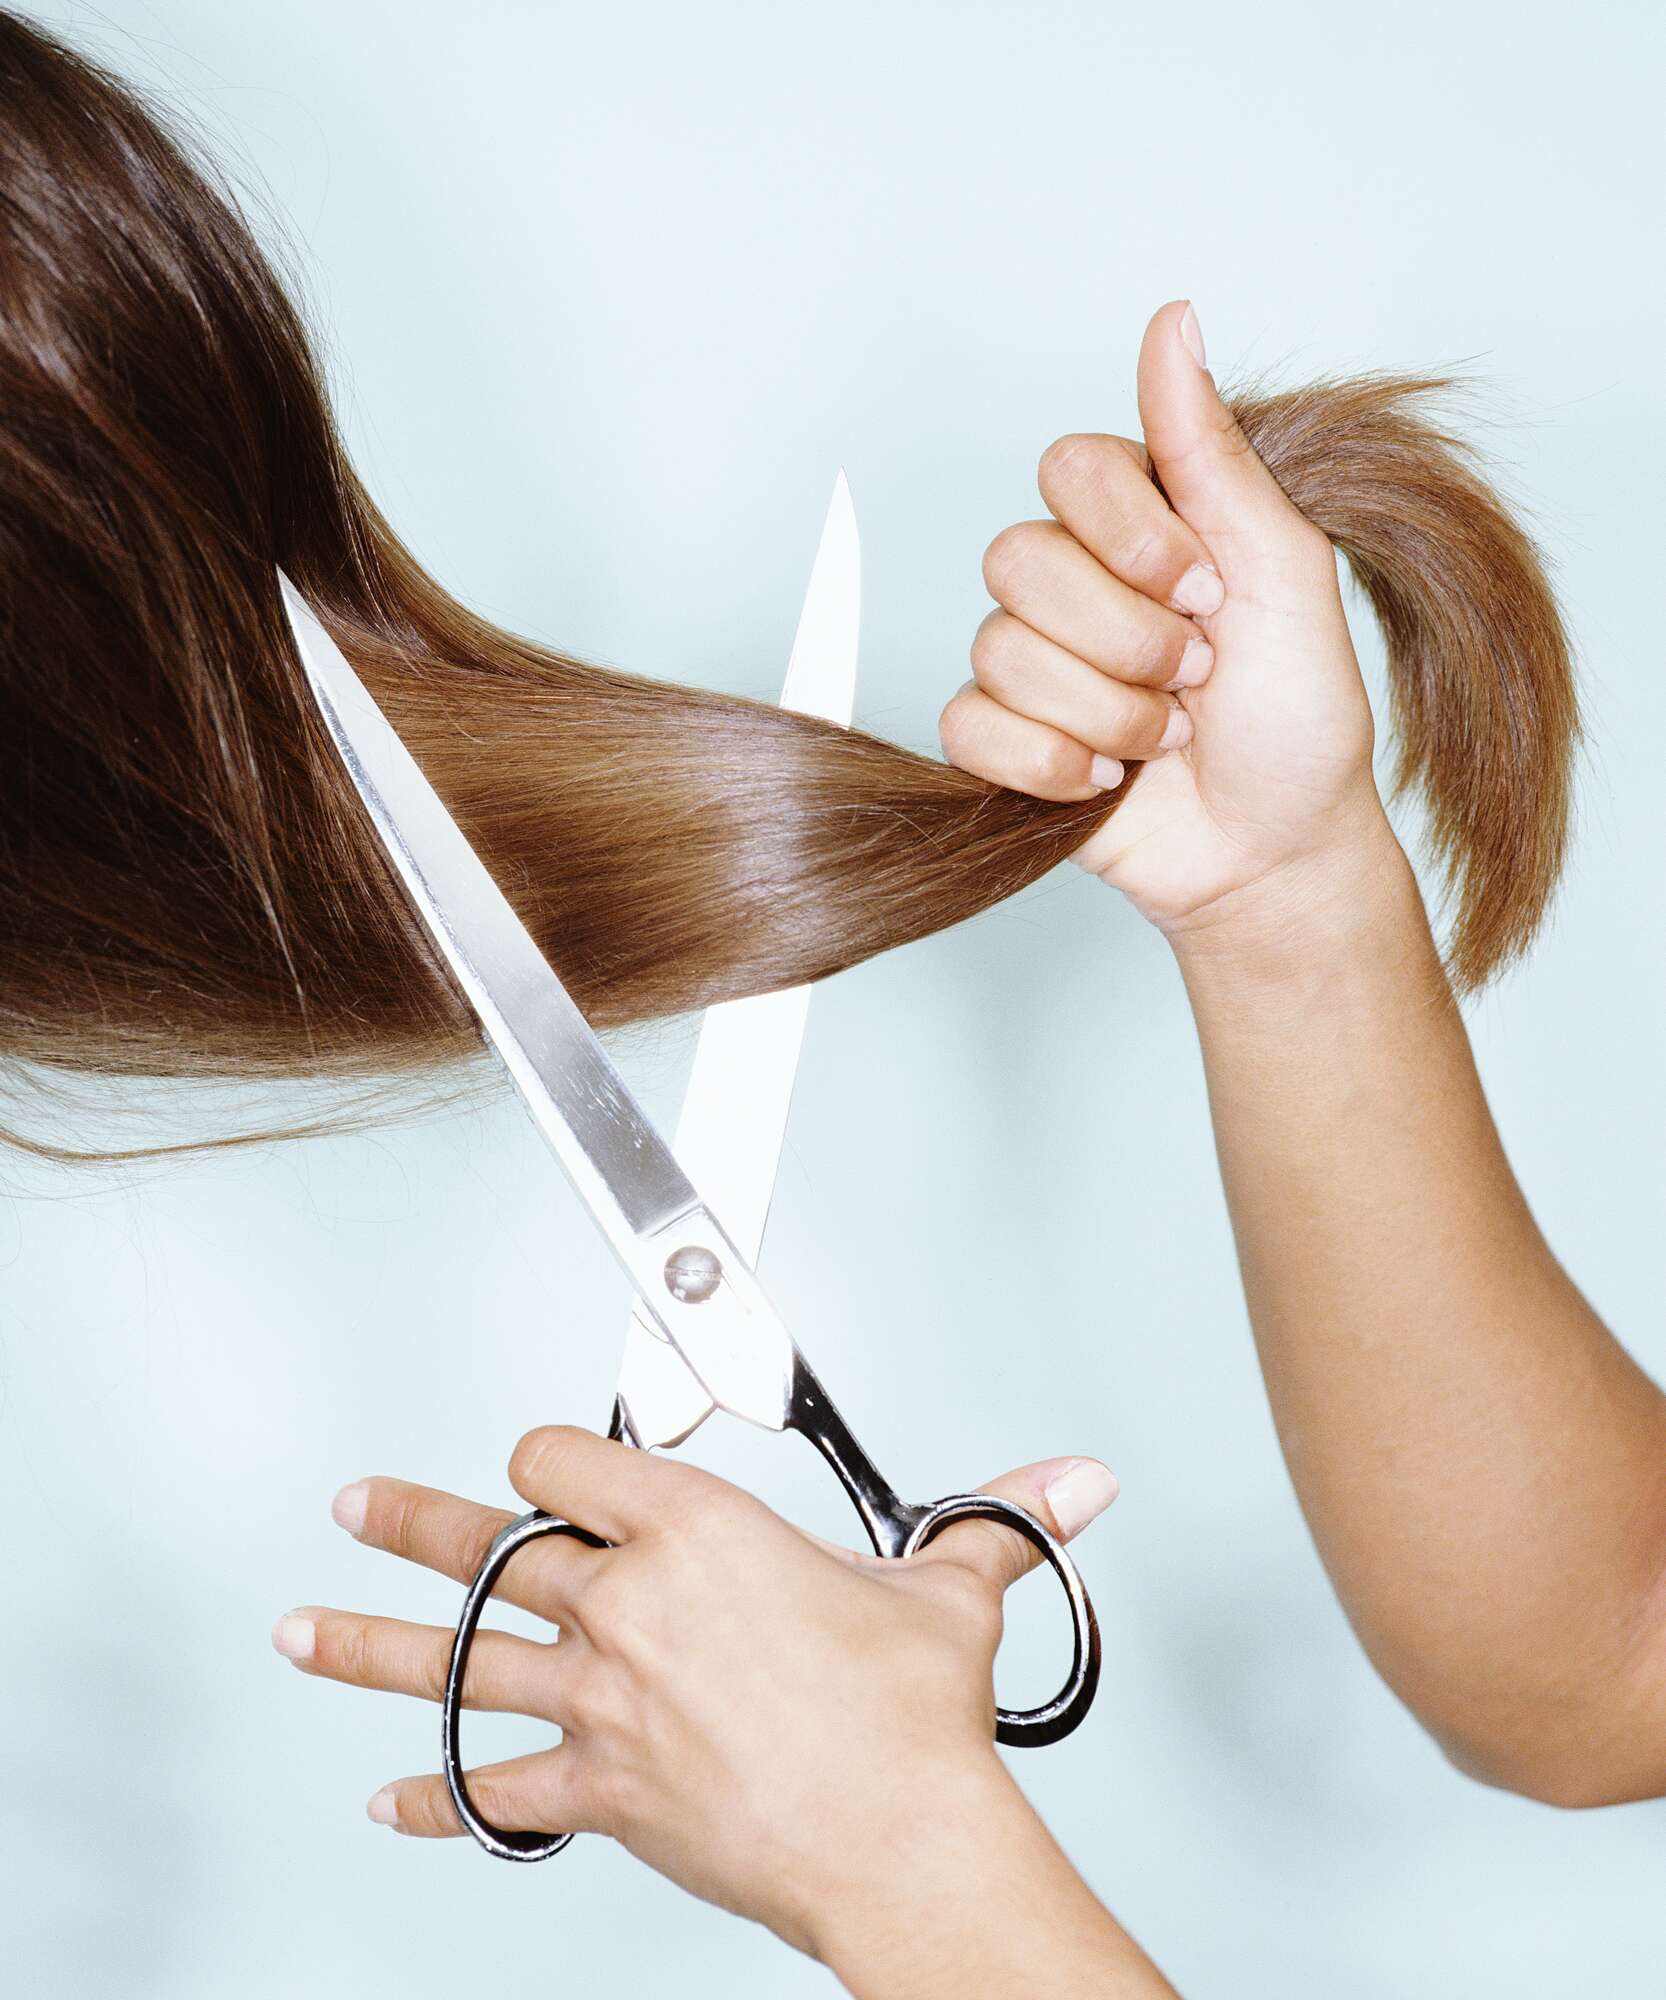 Things to Know Before Cut Your Hair